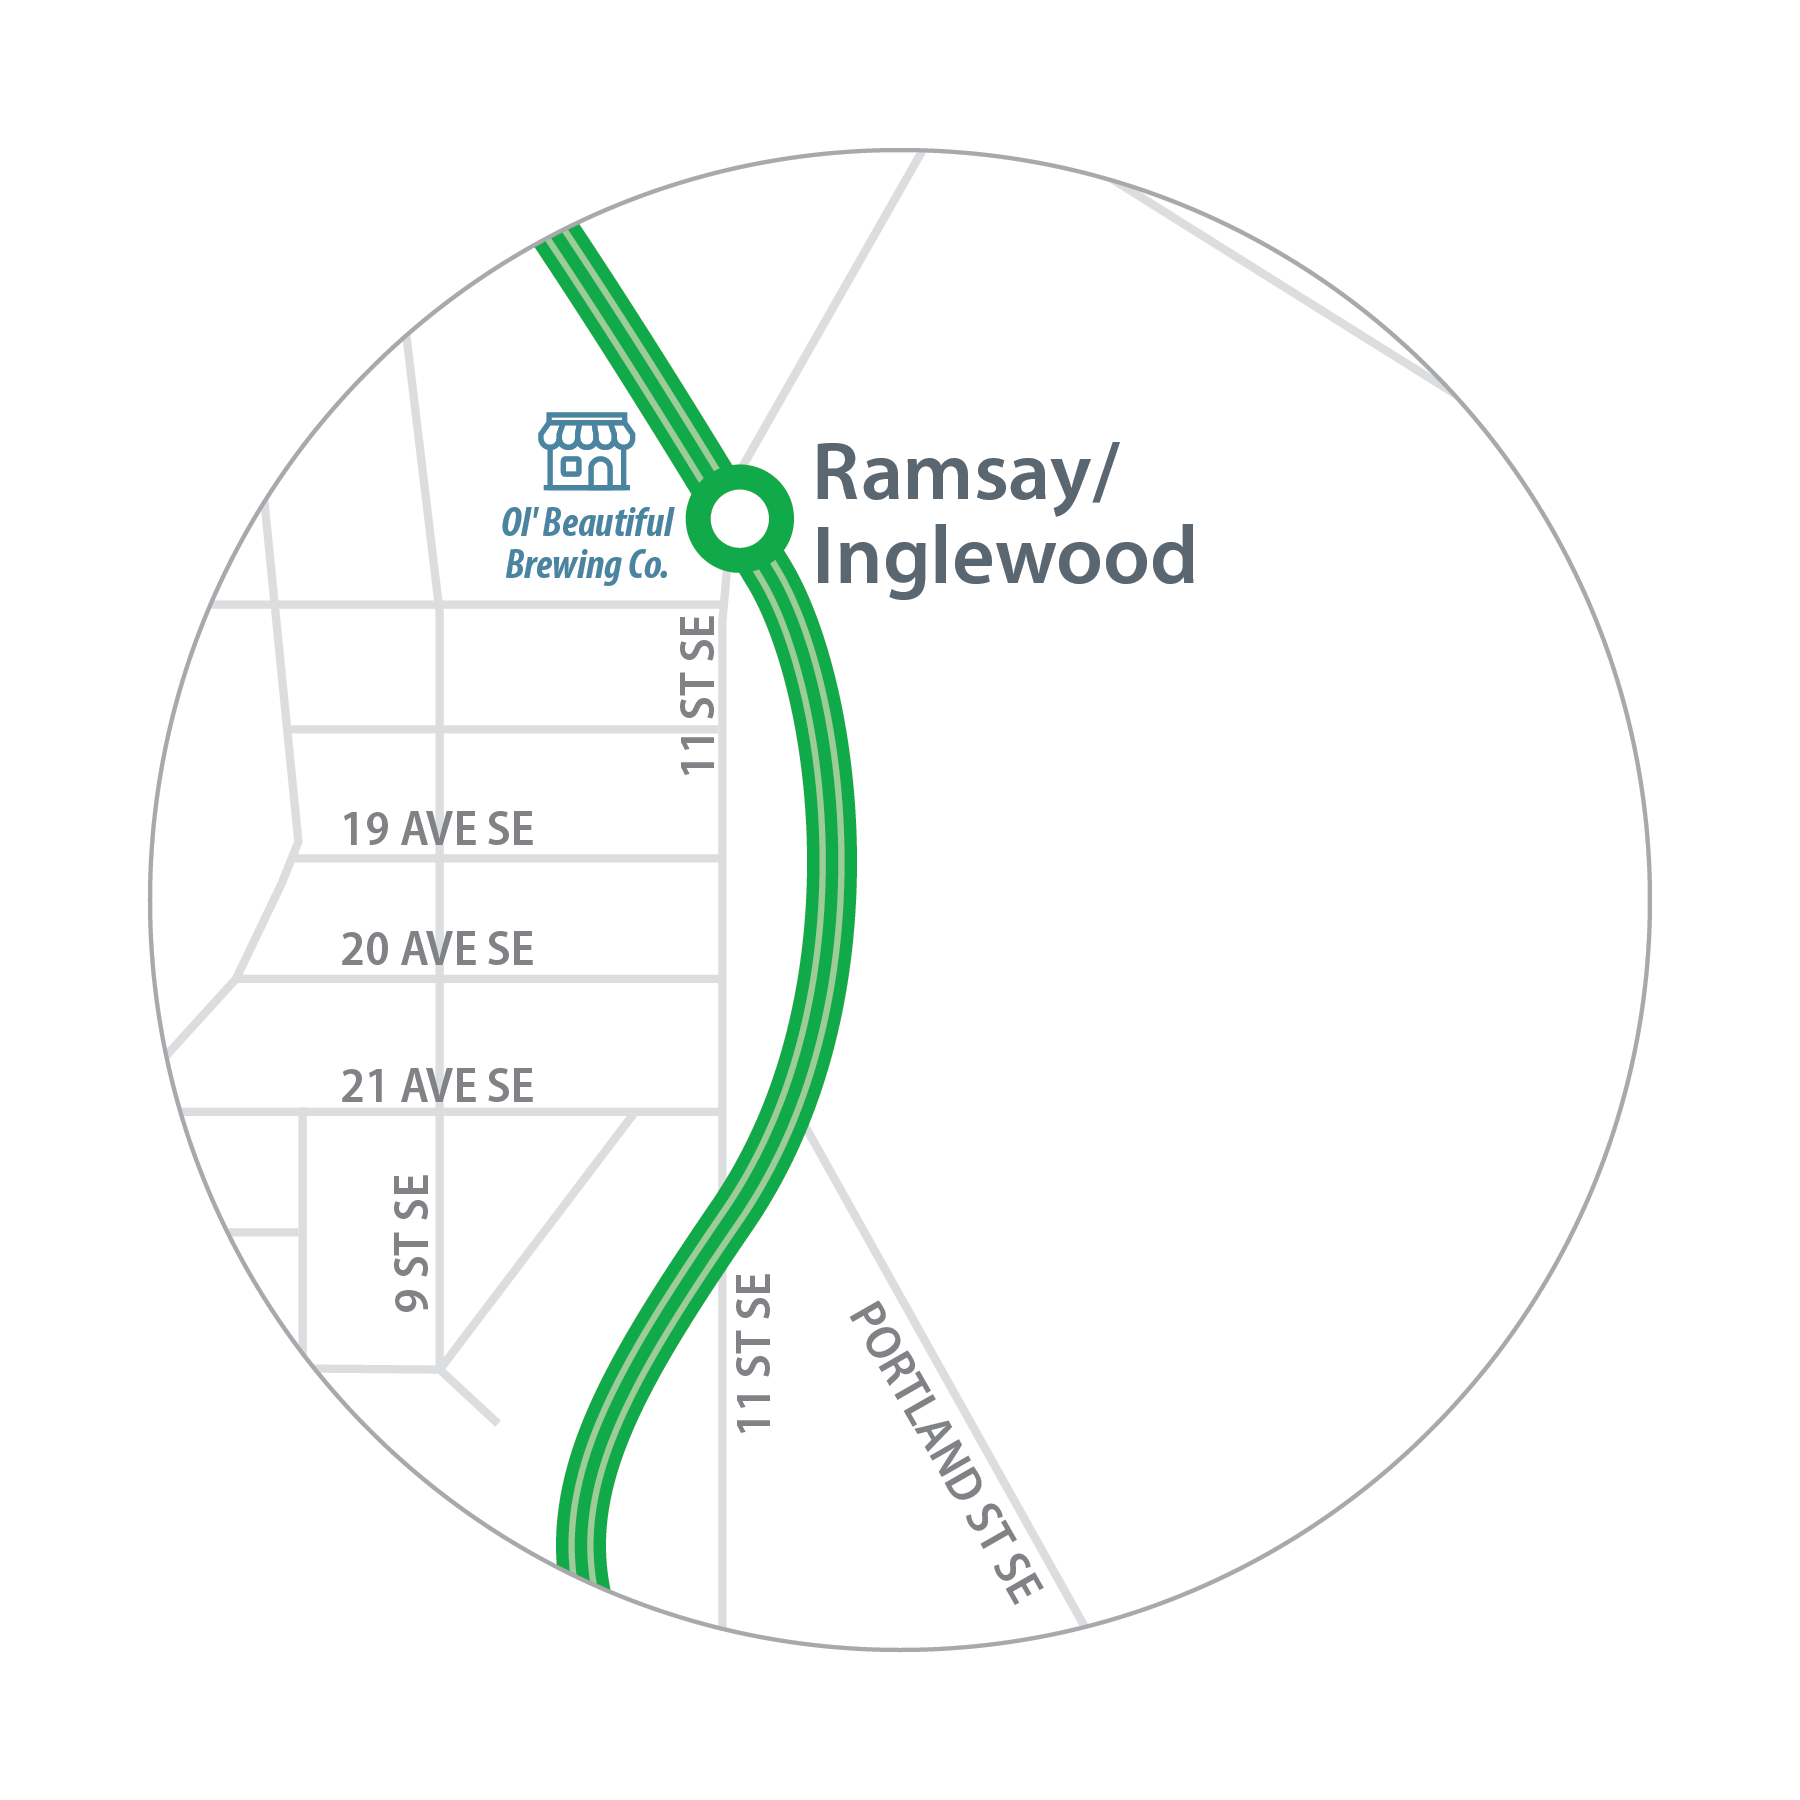 Map of Ol' Beautiful location in relation to Ramsay/Inglewood Station.